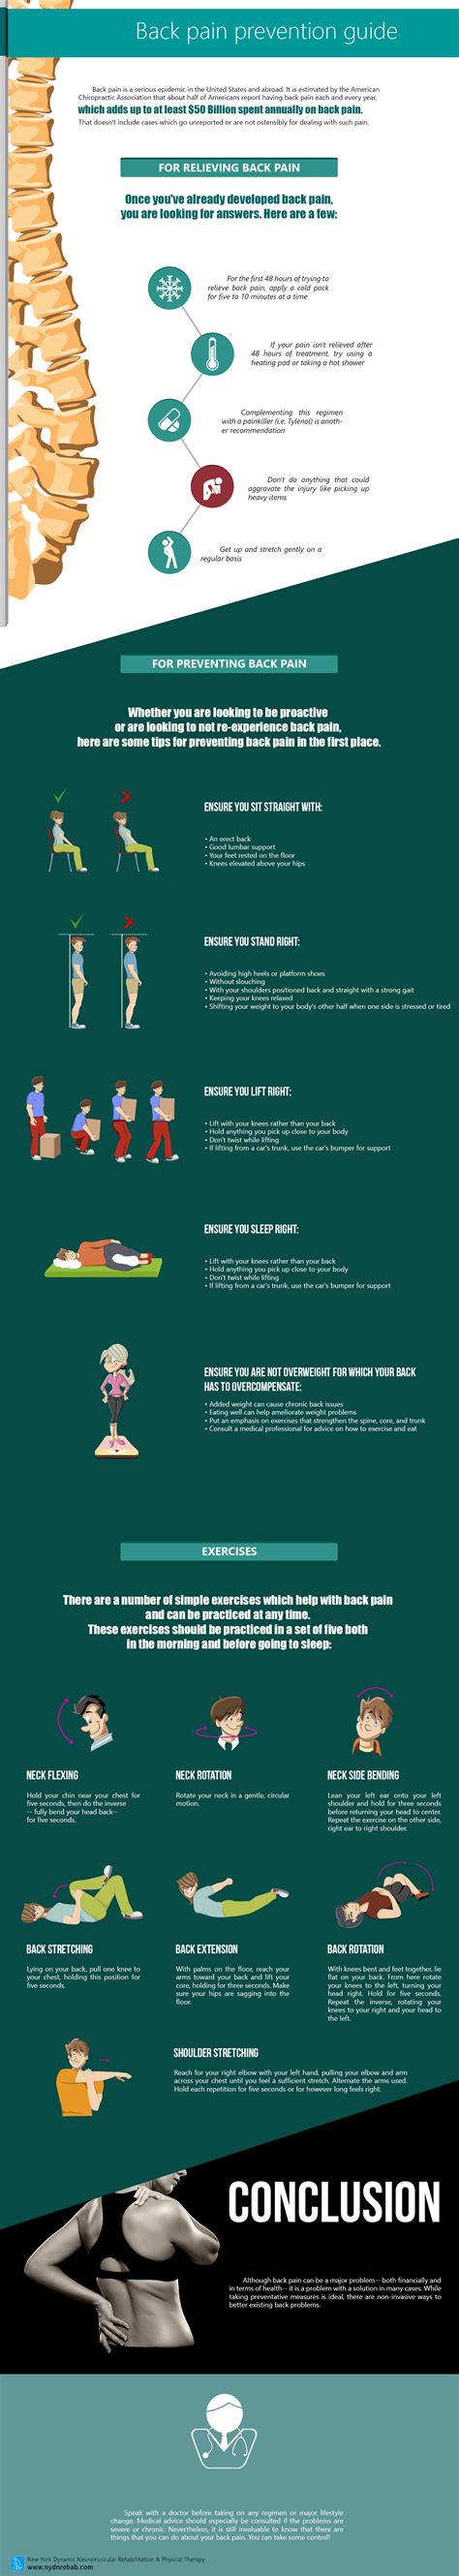 How To Get Back Pain Relief Naturally Infographic